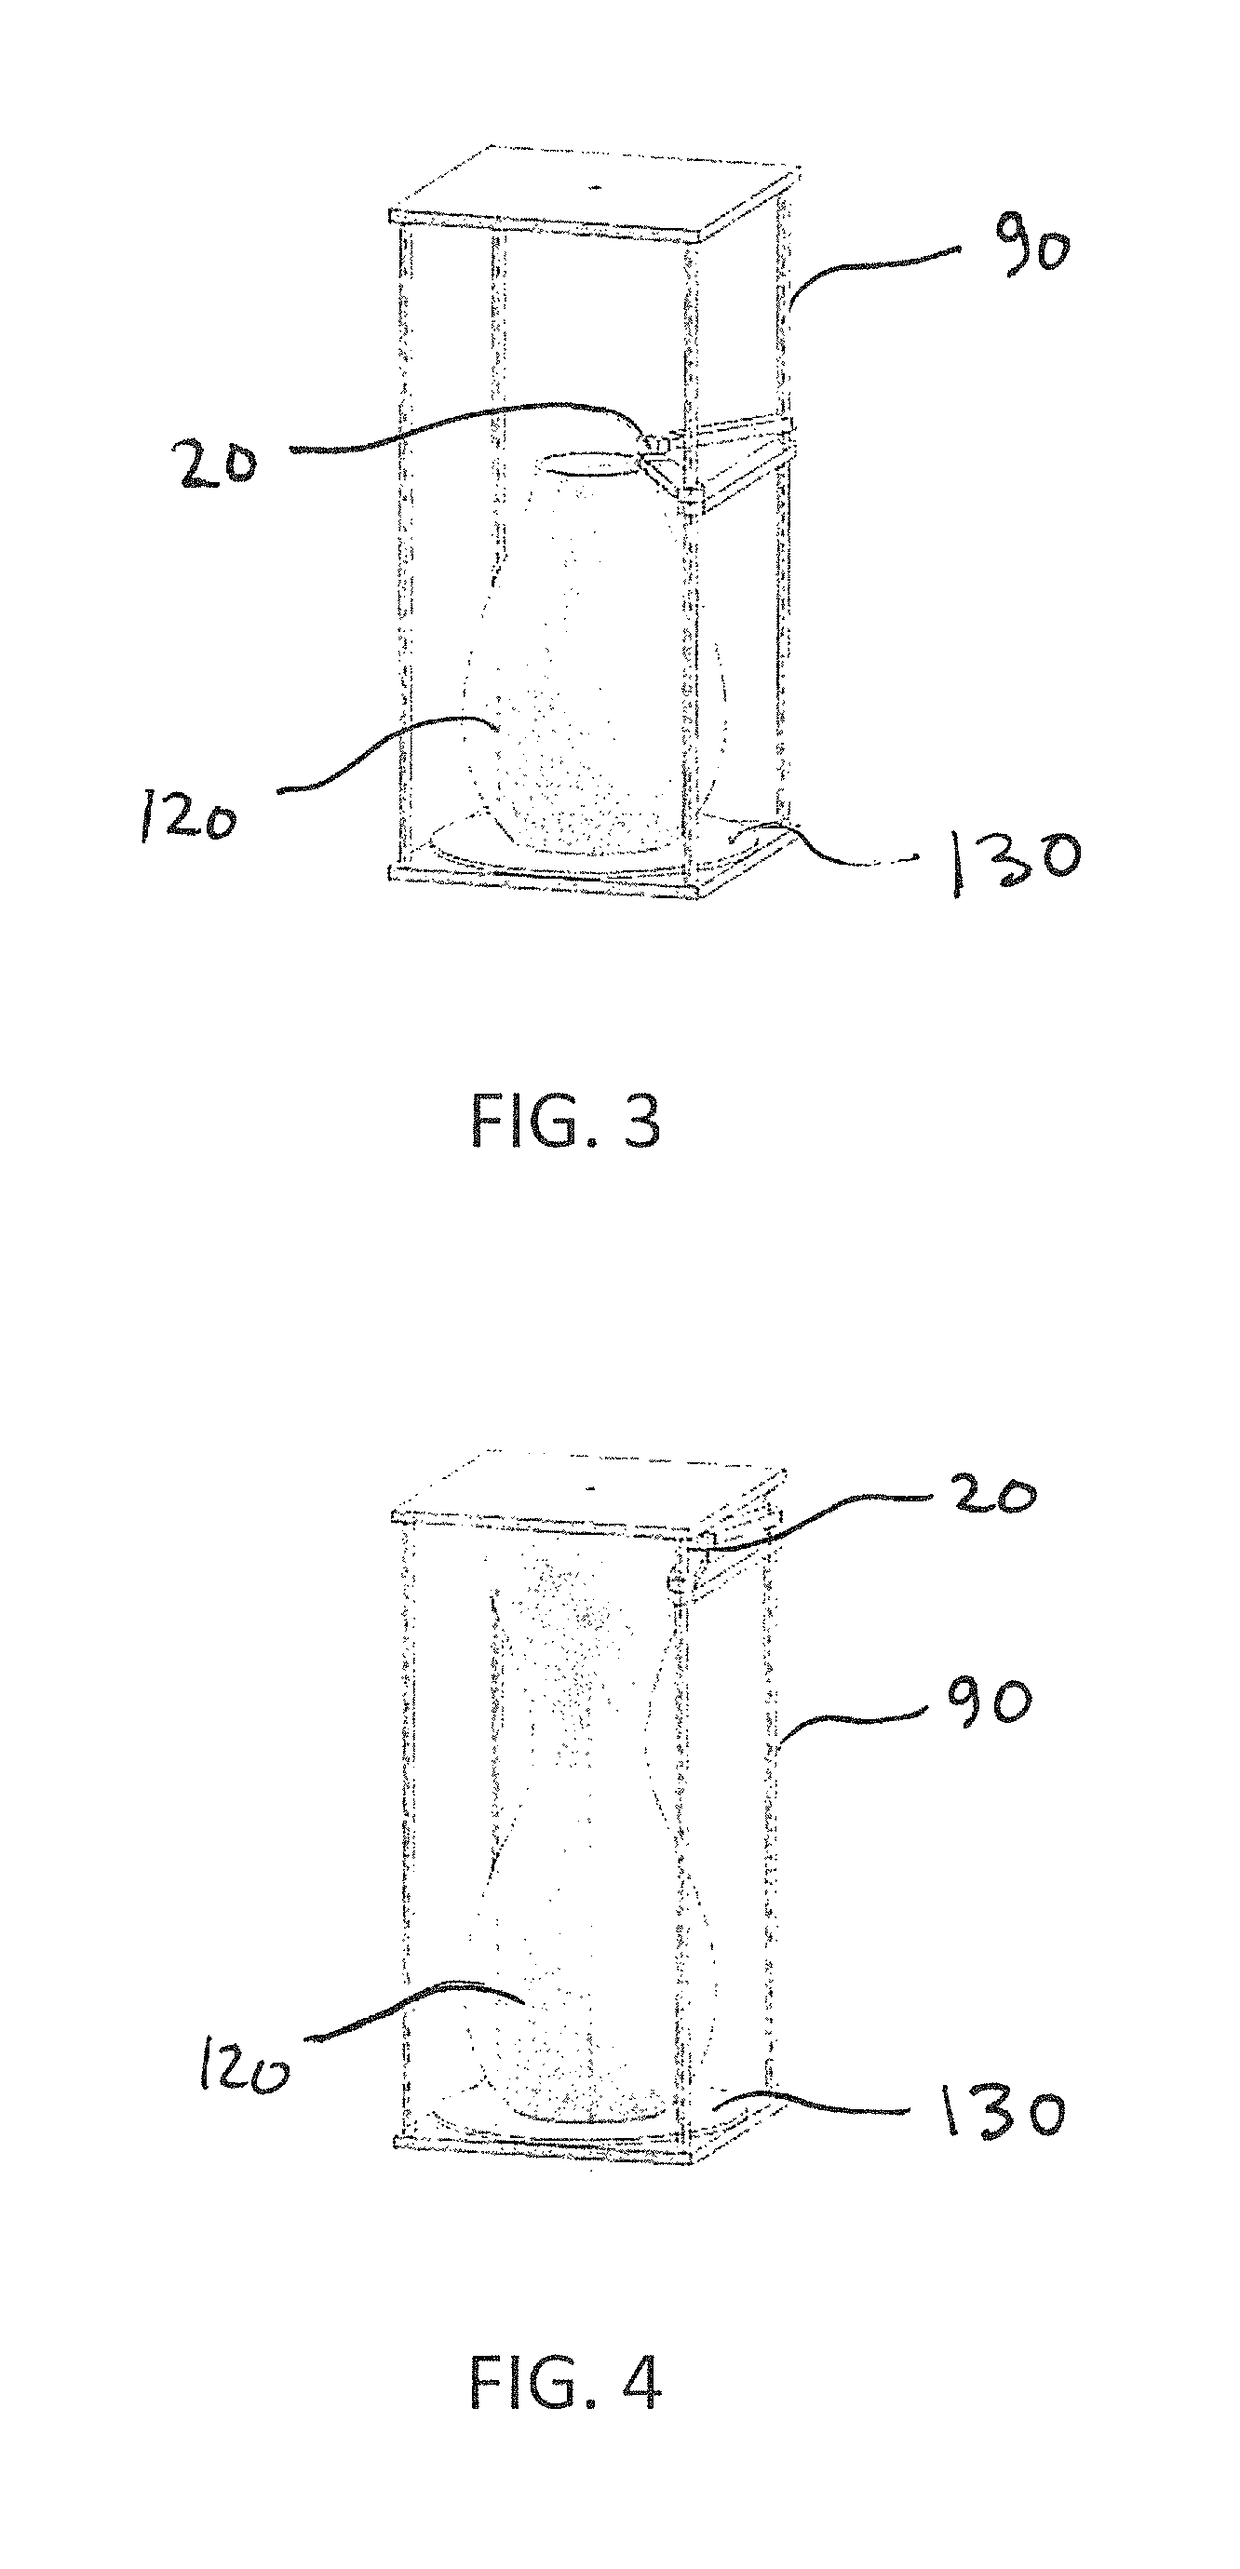 Method of forming a carbon fiber layup